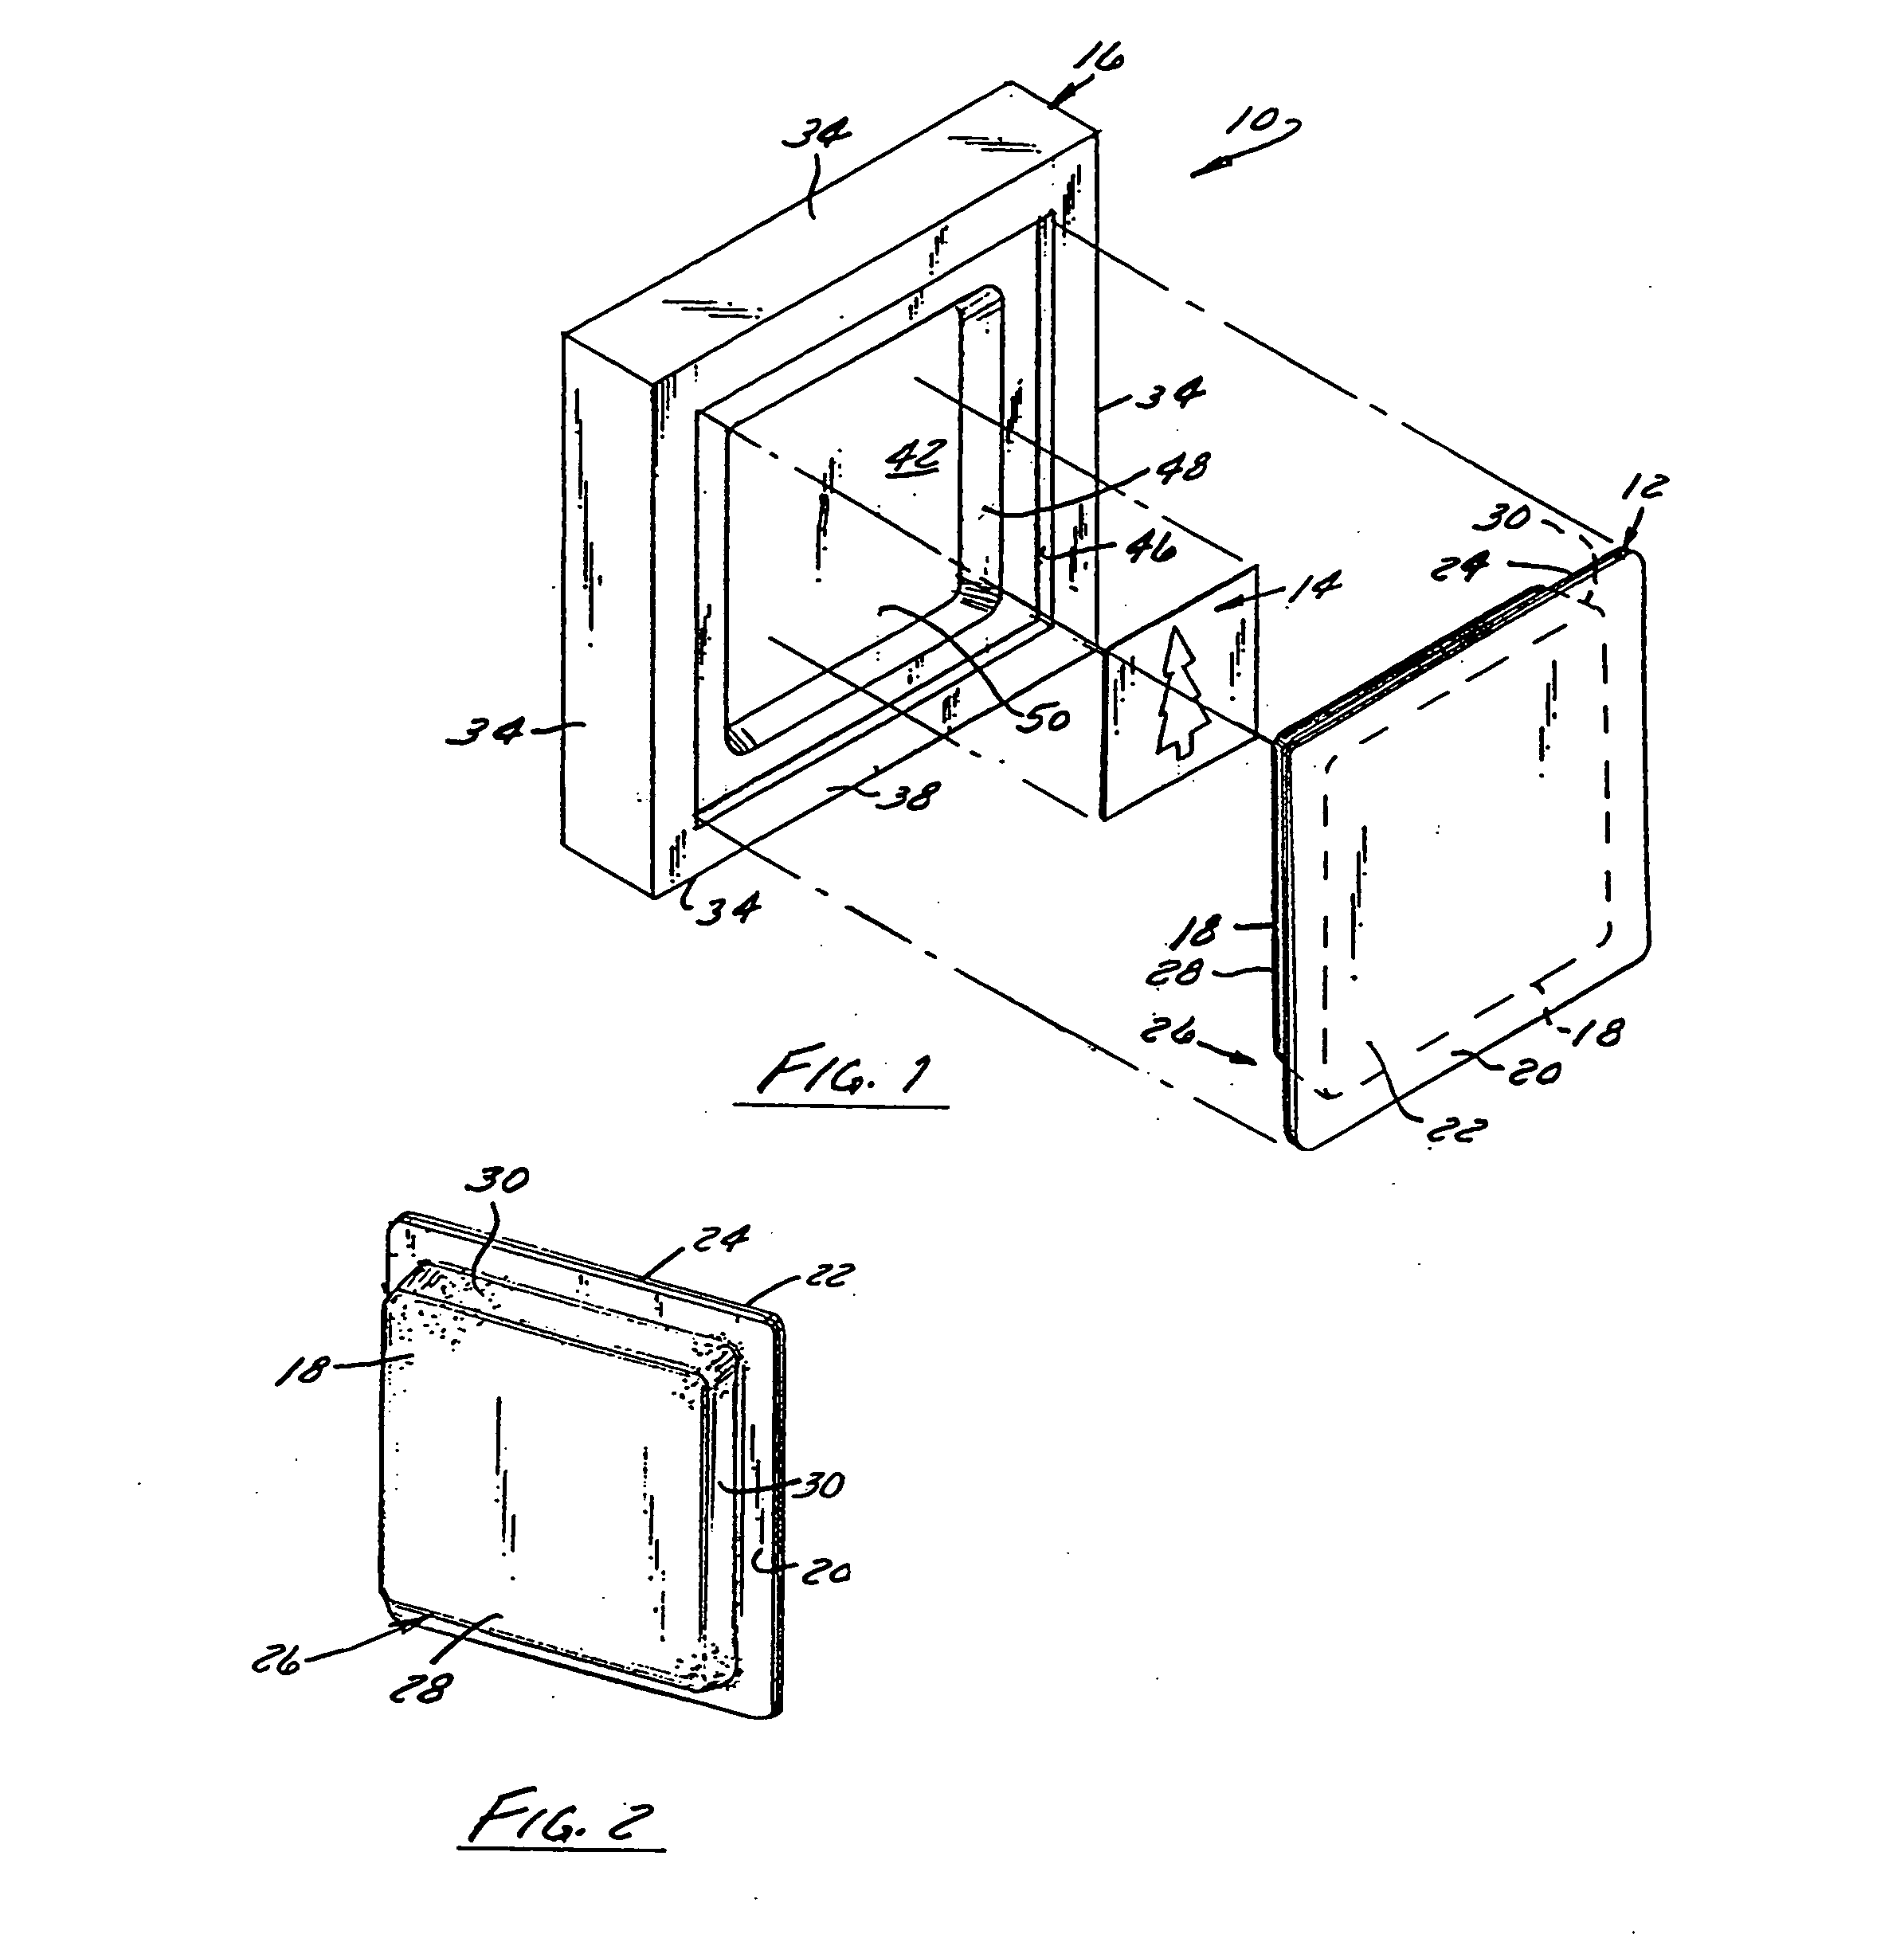 Volatile material dispensing system with illuminating device